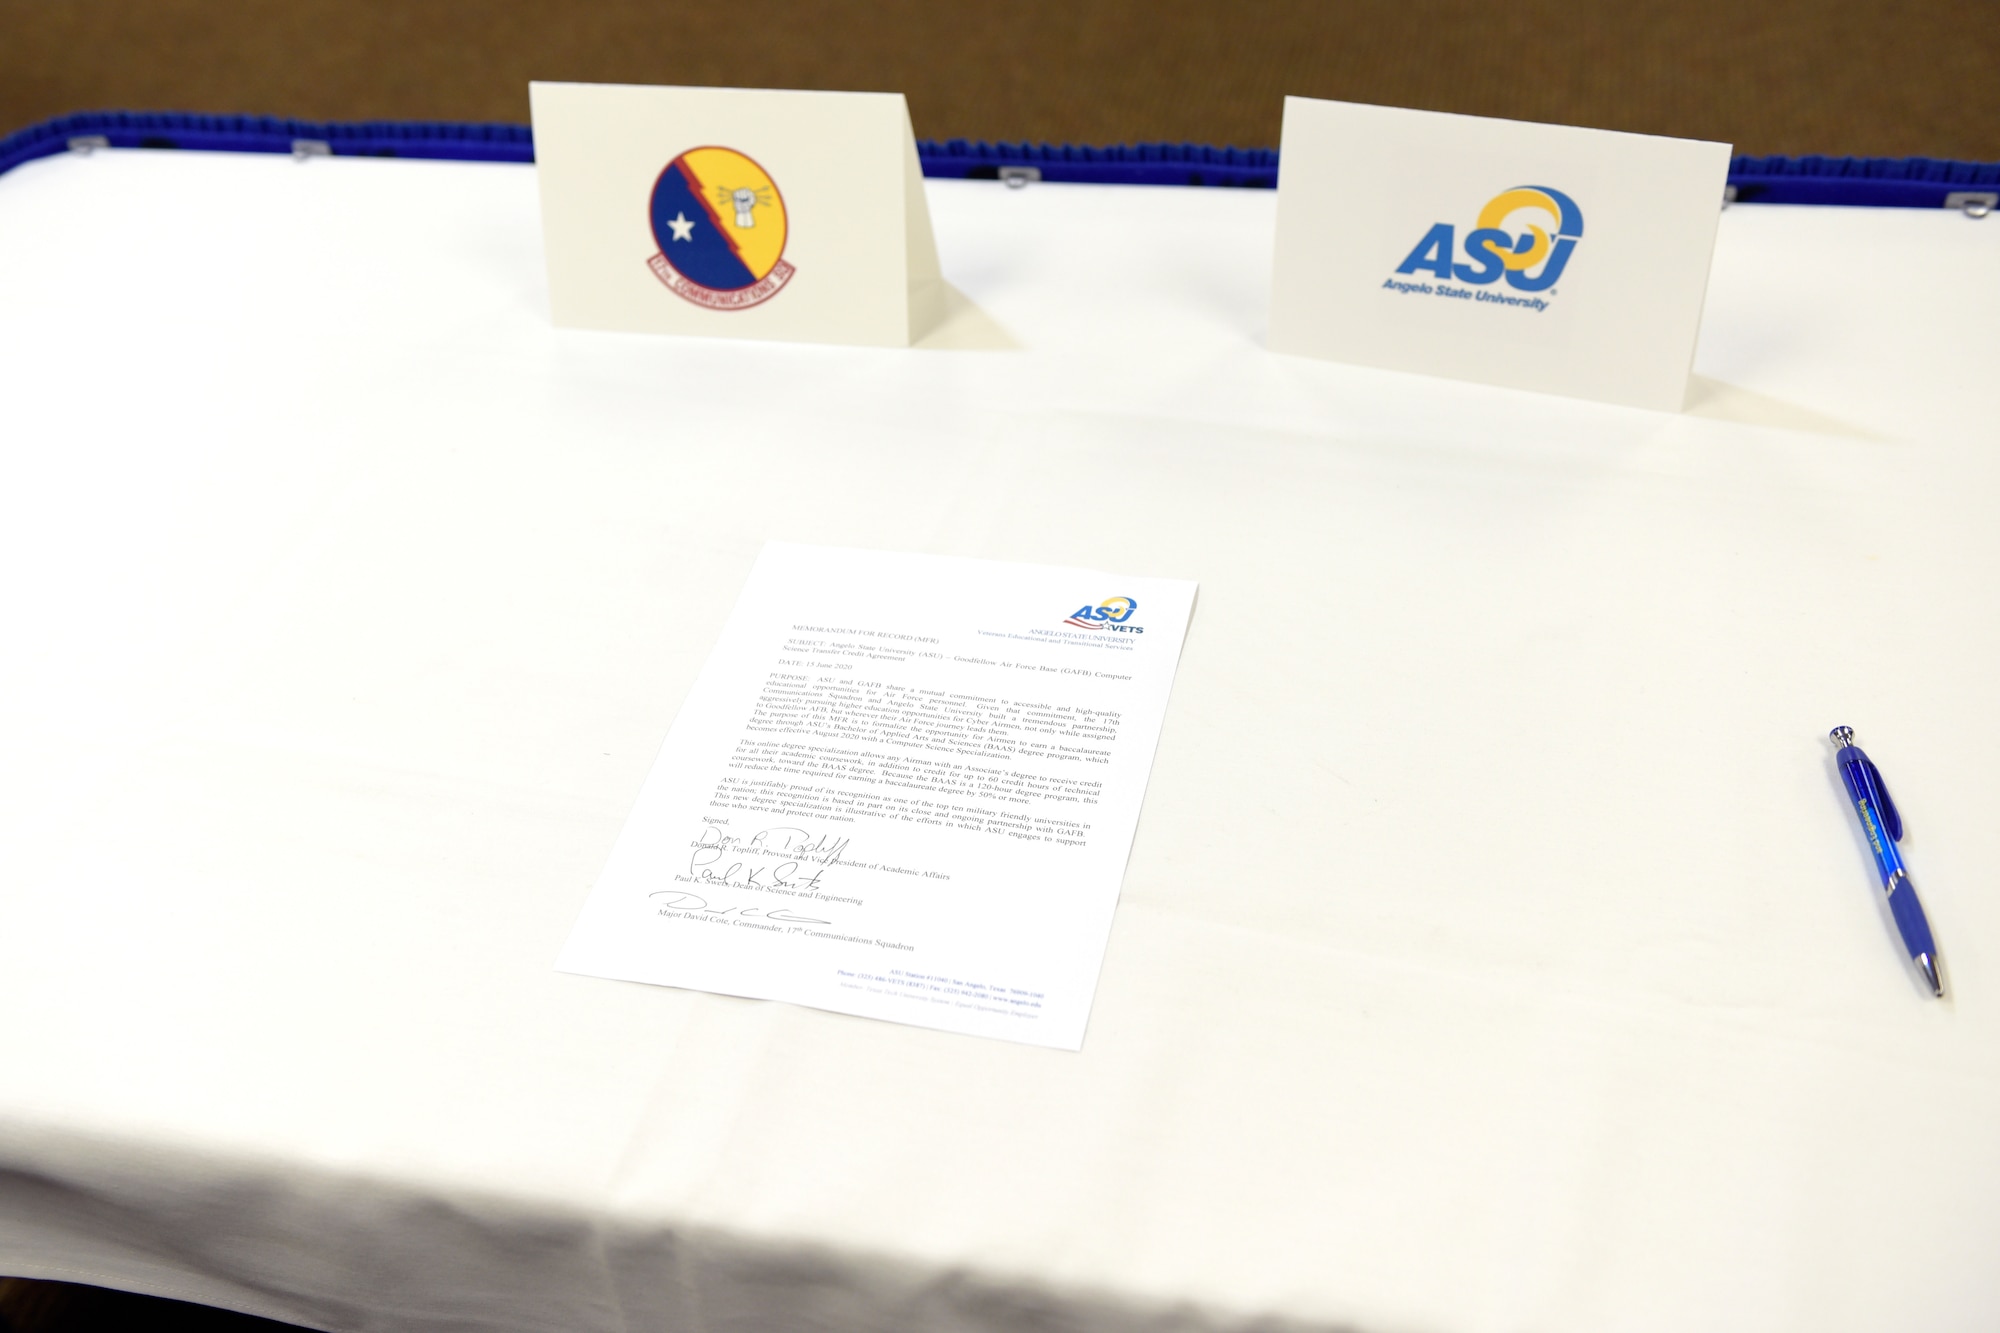 The ink dries on a newly signed agreement between Angelo State University and Goodfellow Air Force Base at ASU’s Houston Harte University Center, in San Angelo, Texas, June 15, 2020. This agreement will make continuing higher education more efficient for individuals, by reducing the time required for earning this 120-hour Bachelor of Applied Arts and Science by 50% or more.  (U.S. Air Force photo by Senior Airman Zachary Chapman)